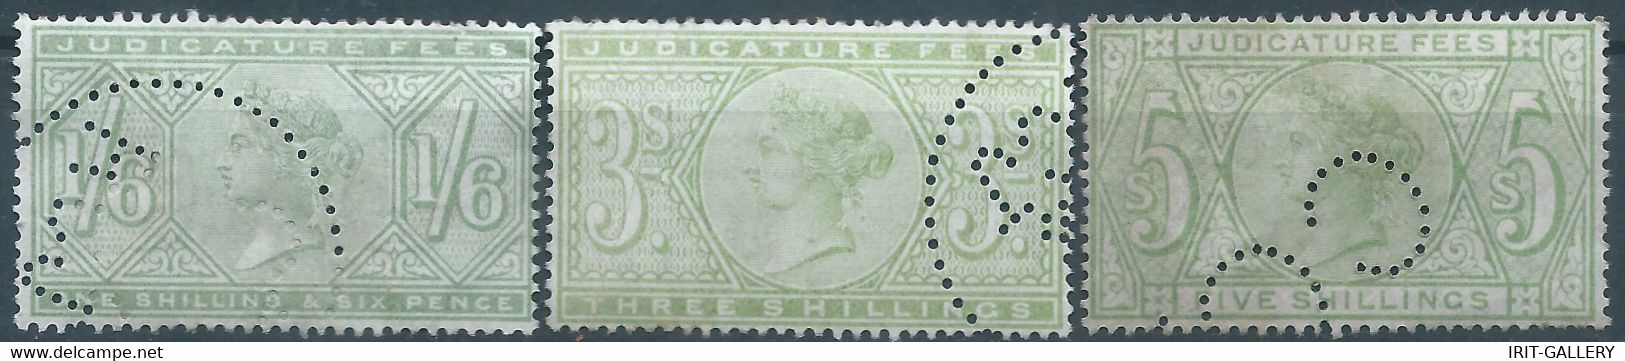 Great Britain-ENGLAND,Queen Victoria,1870-1800 Revenue Stamp Tax Fisca,JUDICATURE FEES,1/6-3-5 Shillings,PERFIN - Used - Fiscaux